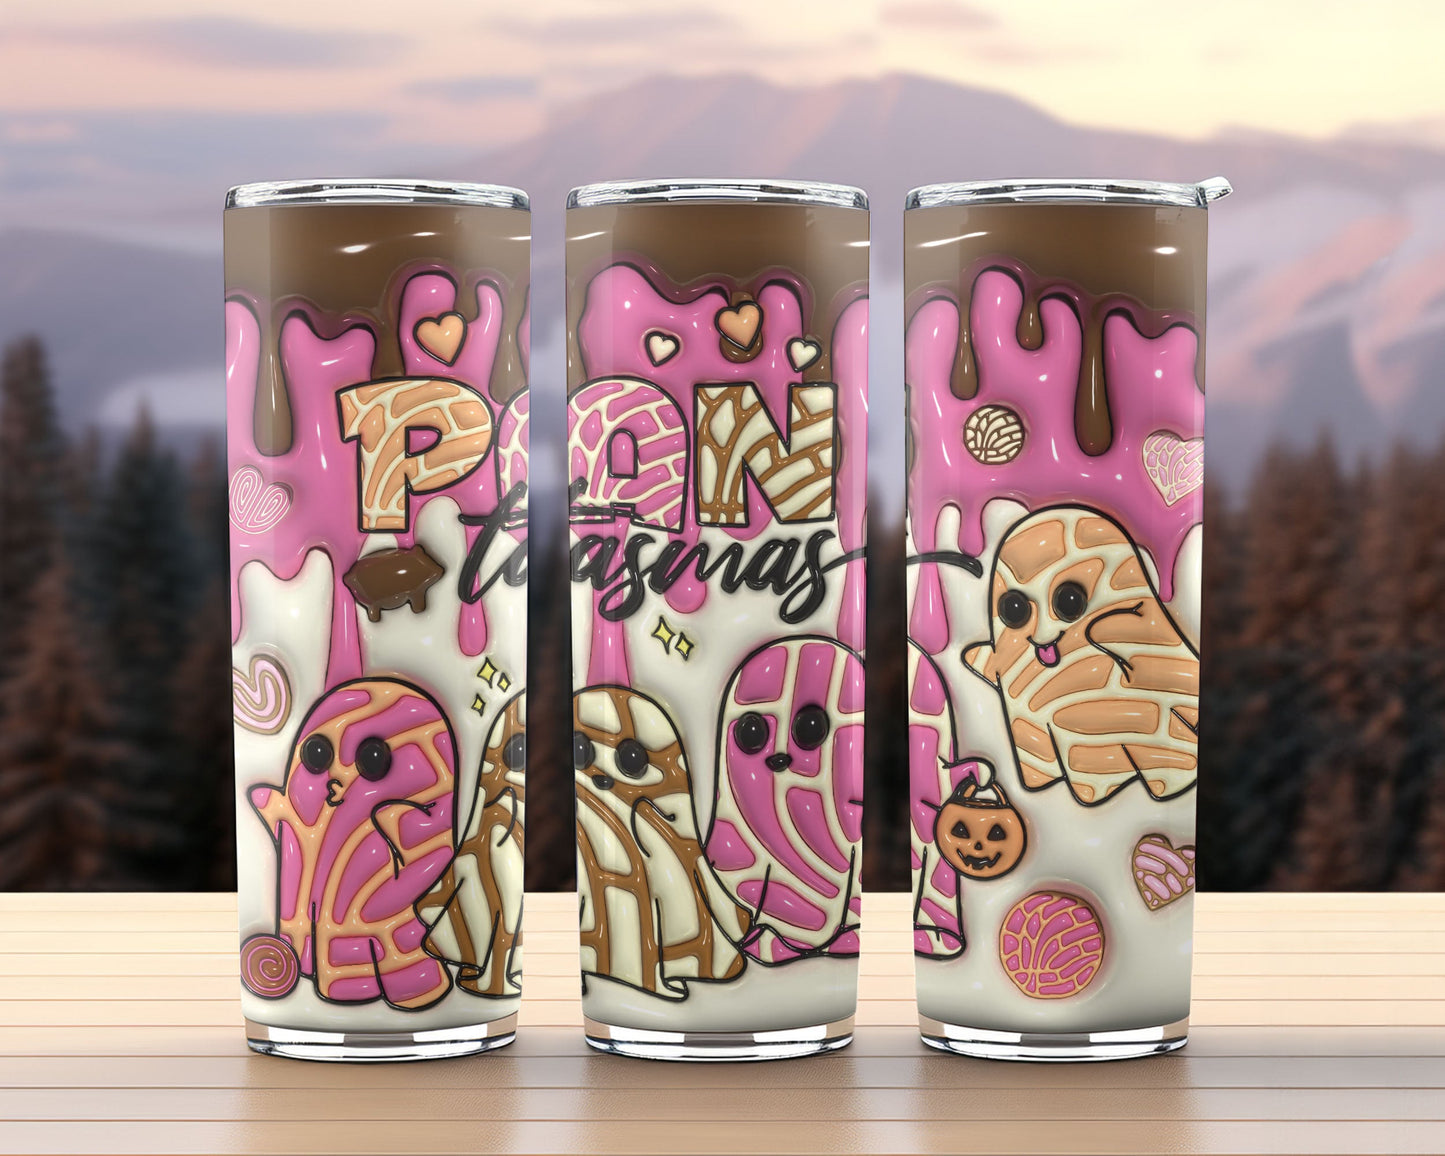 3D Spooky Conchas Inflated Tumbler Wrap, Mexican Pan Dulce Ghost Tumbler, Puffy Halloween Ghost Tumbler, Mexican Conchas, Pan Dulce - VartDigitals